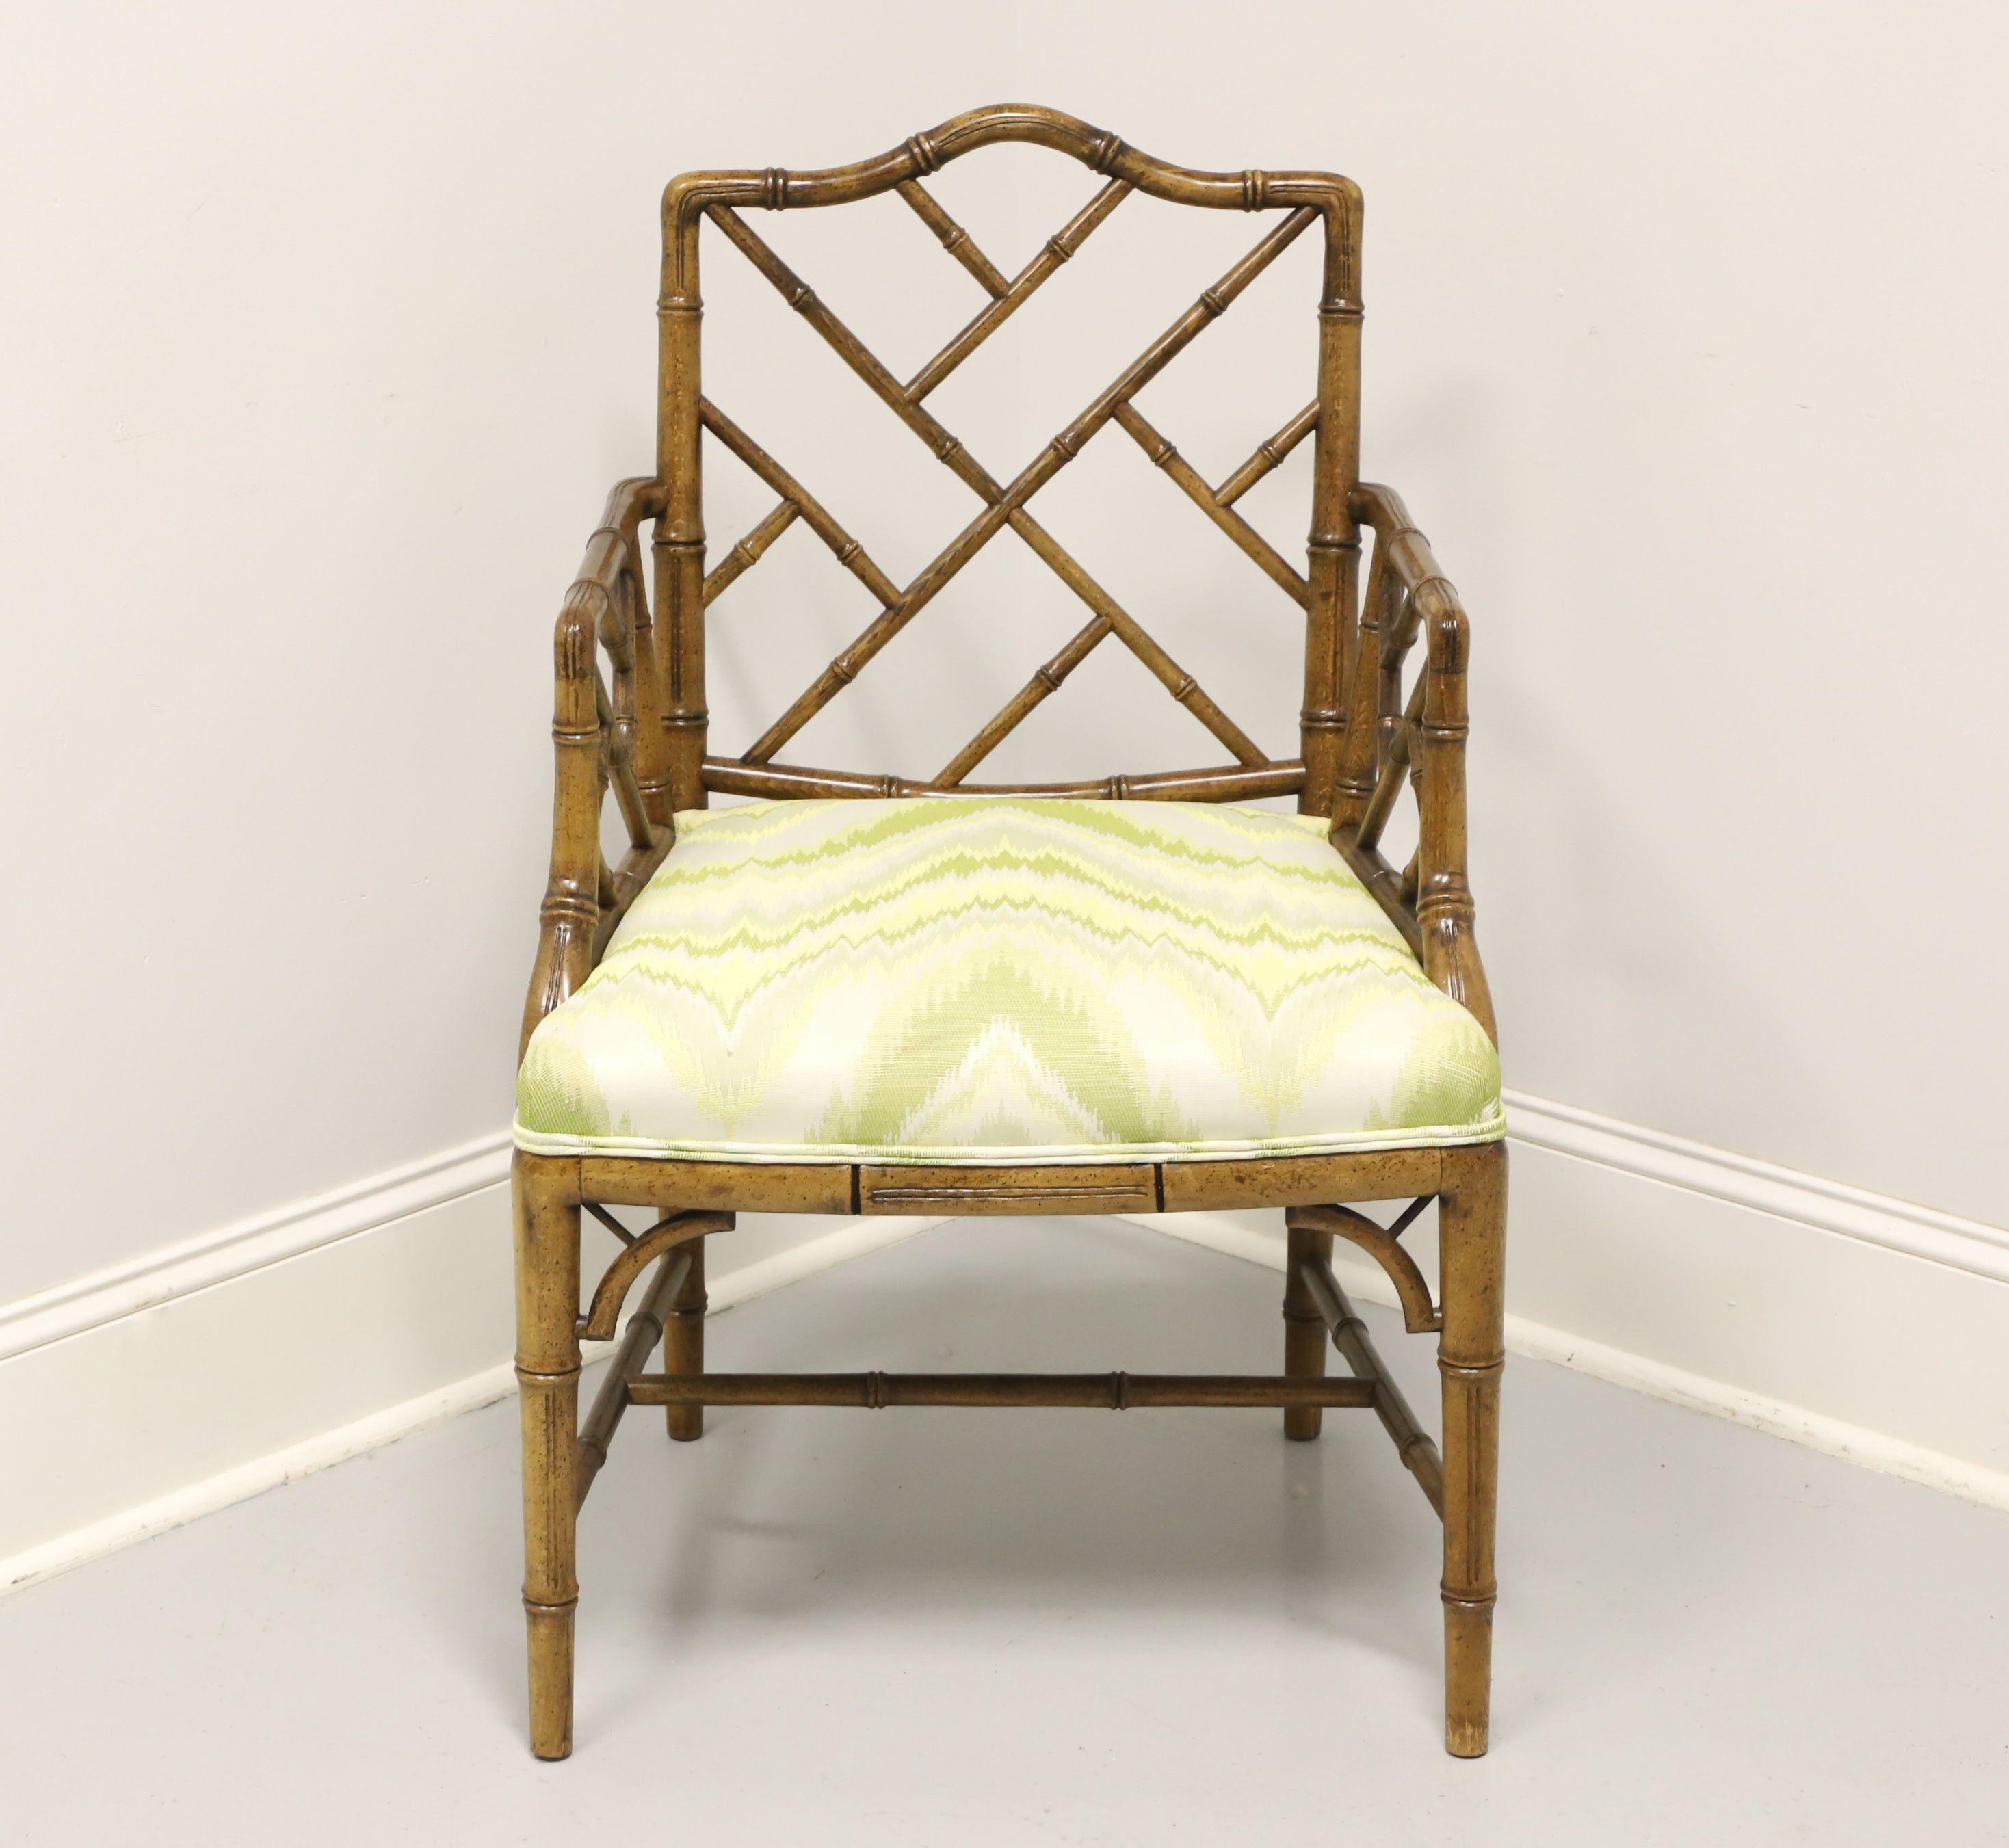 A Chinese Chippendale style armchair by Century Chair Company. Faux bamboo frame with decorative lattice back, curved arms with lattice, green & white color flame pattern fabric upholstered seat, lattice accents to front corners under apron, tapered